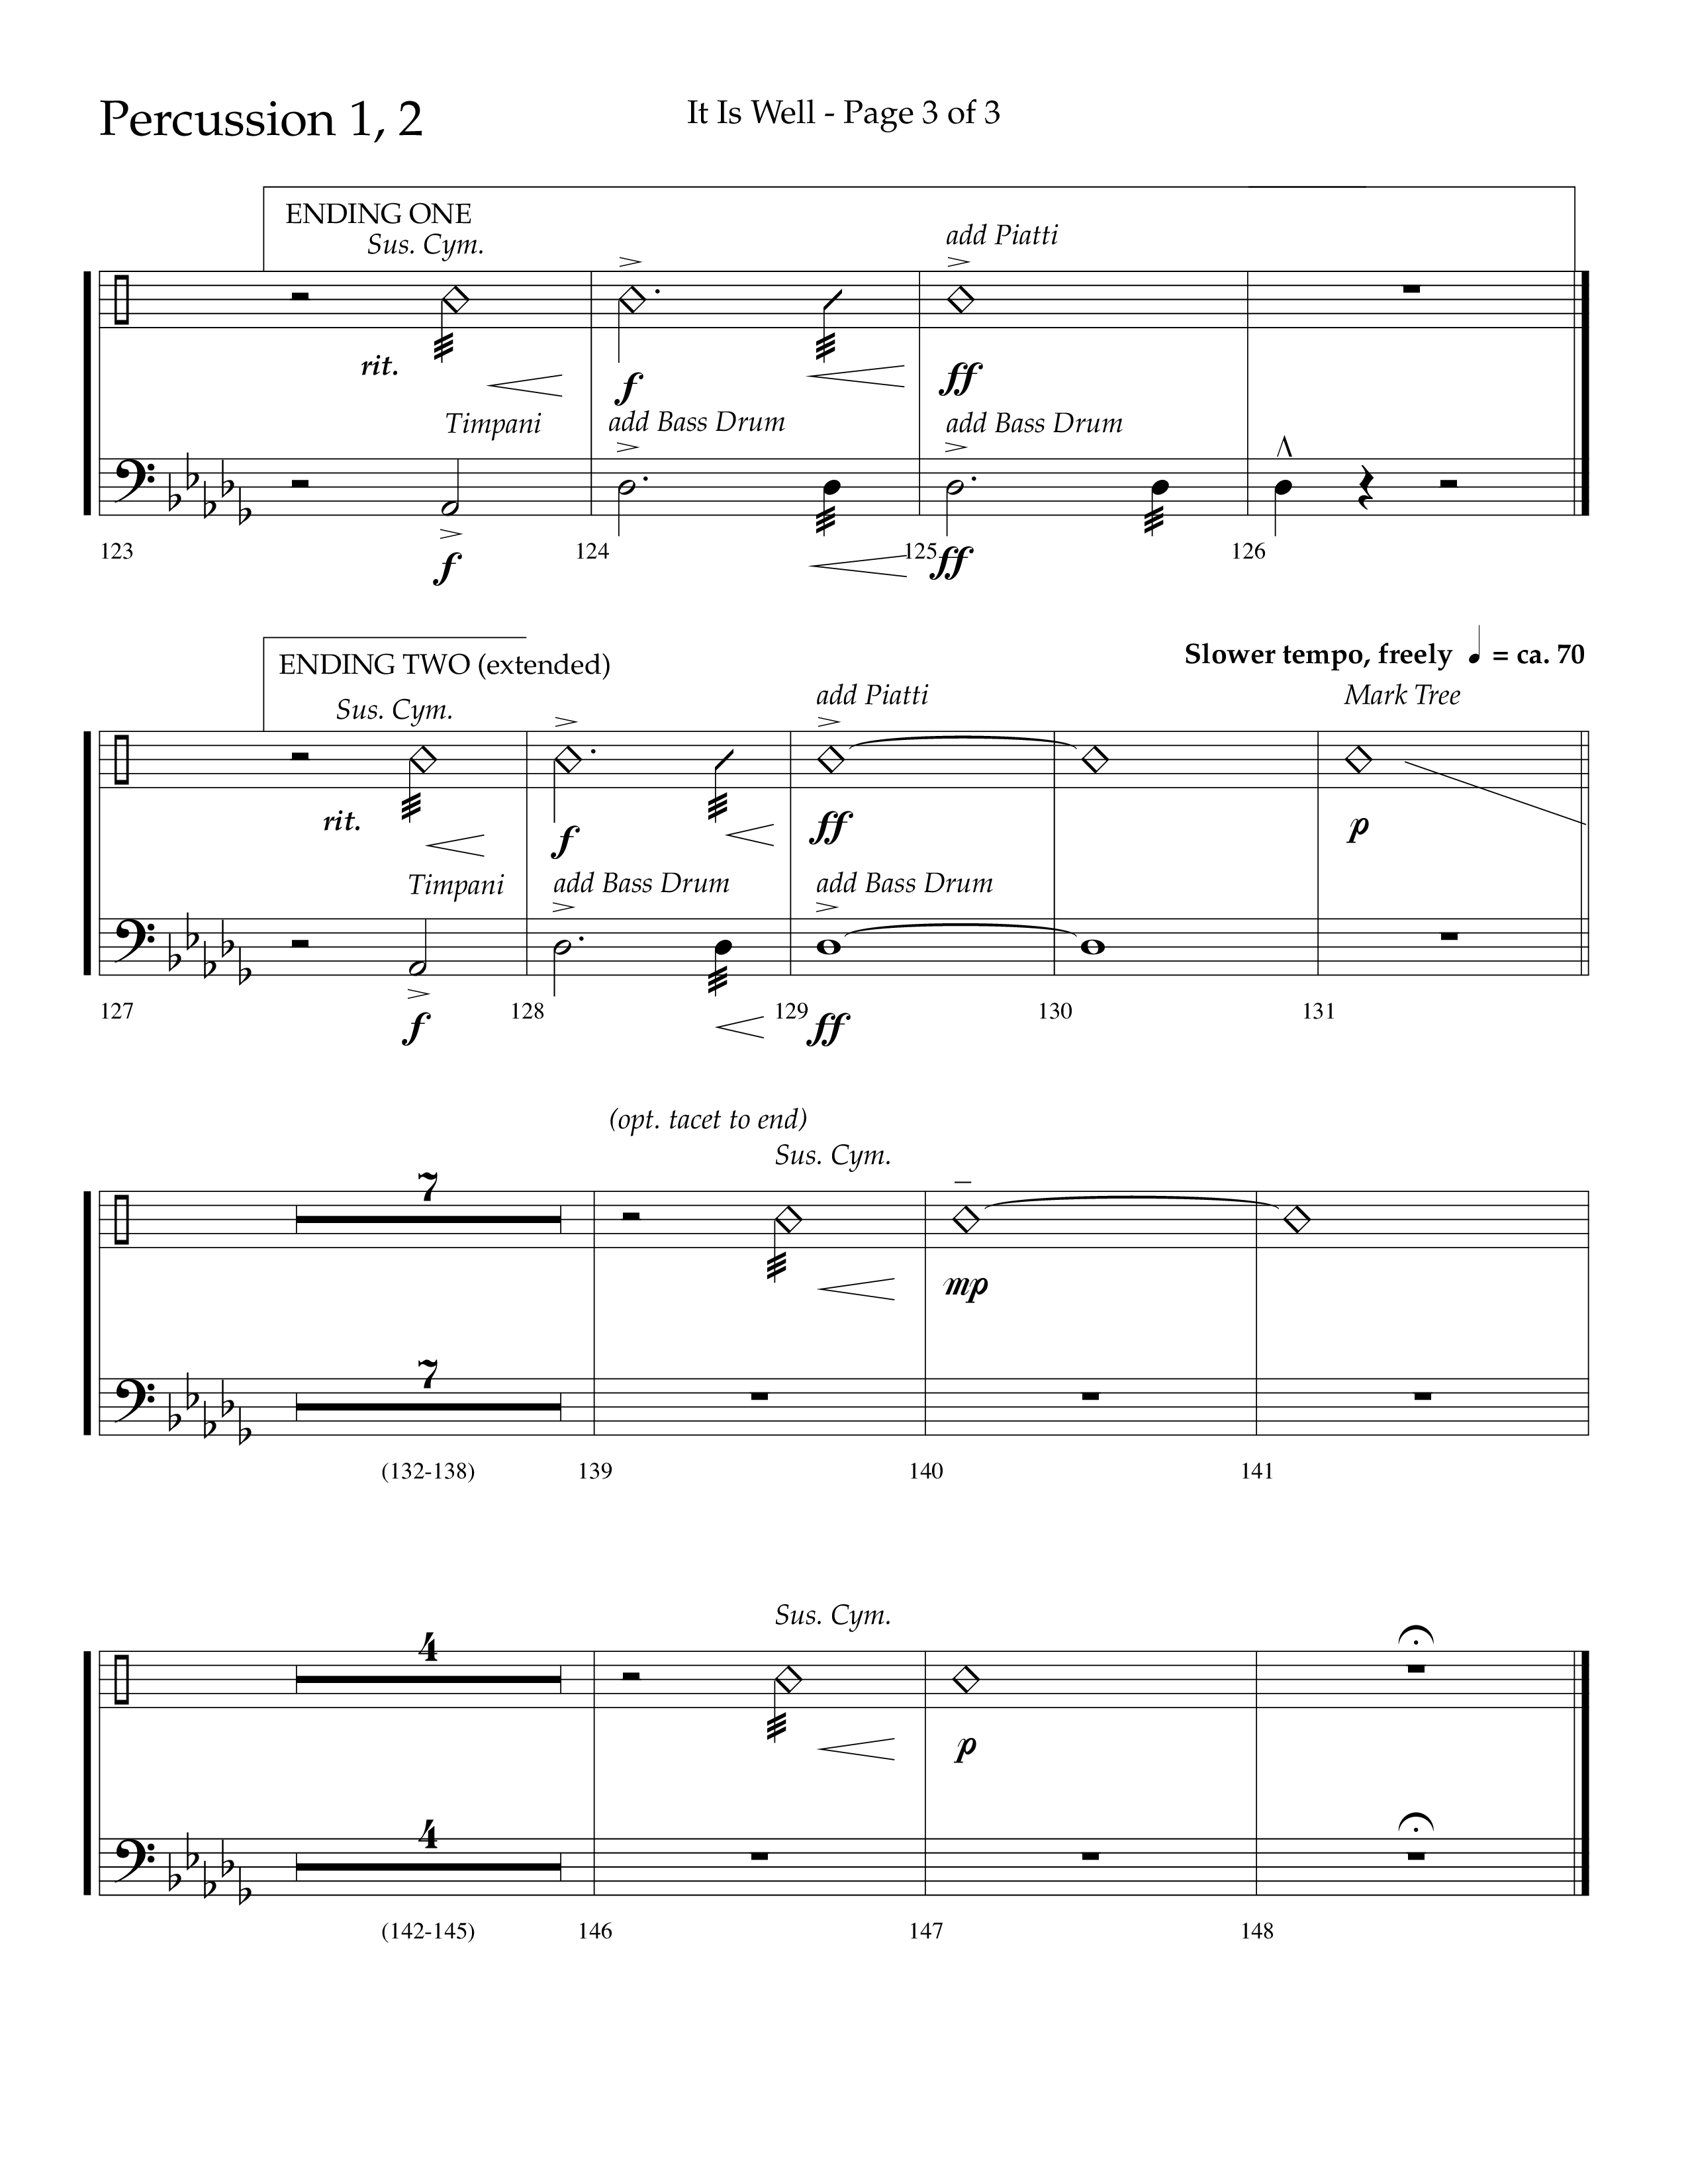 It Is Well (Choral Anthem SATB) Percussion 1/2 (Lifeway Choral / Arr. Cliff Duren)